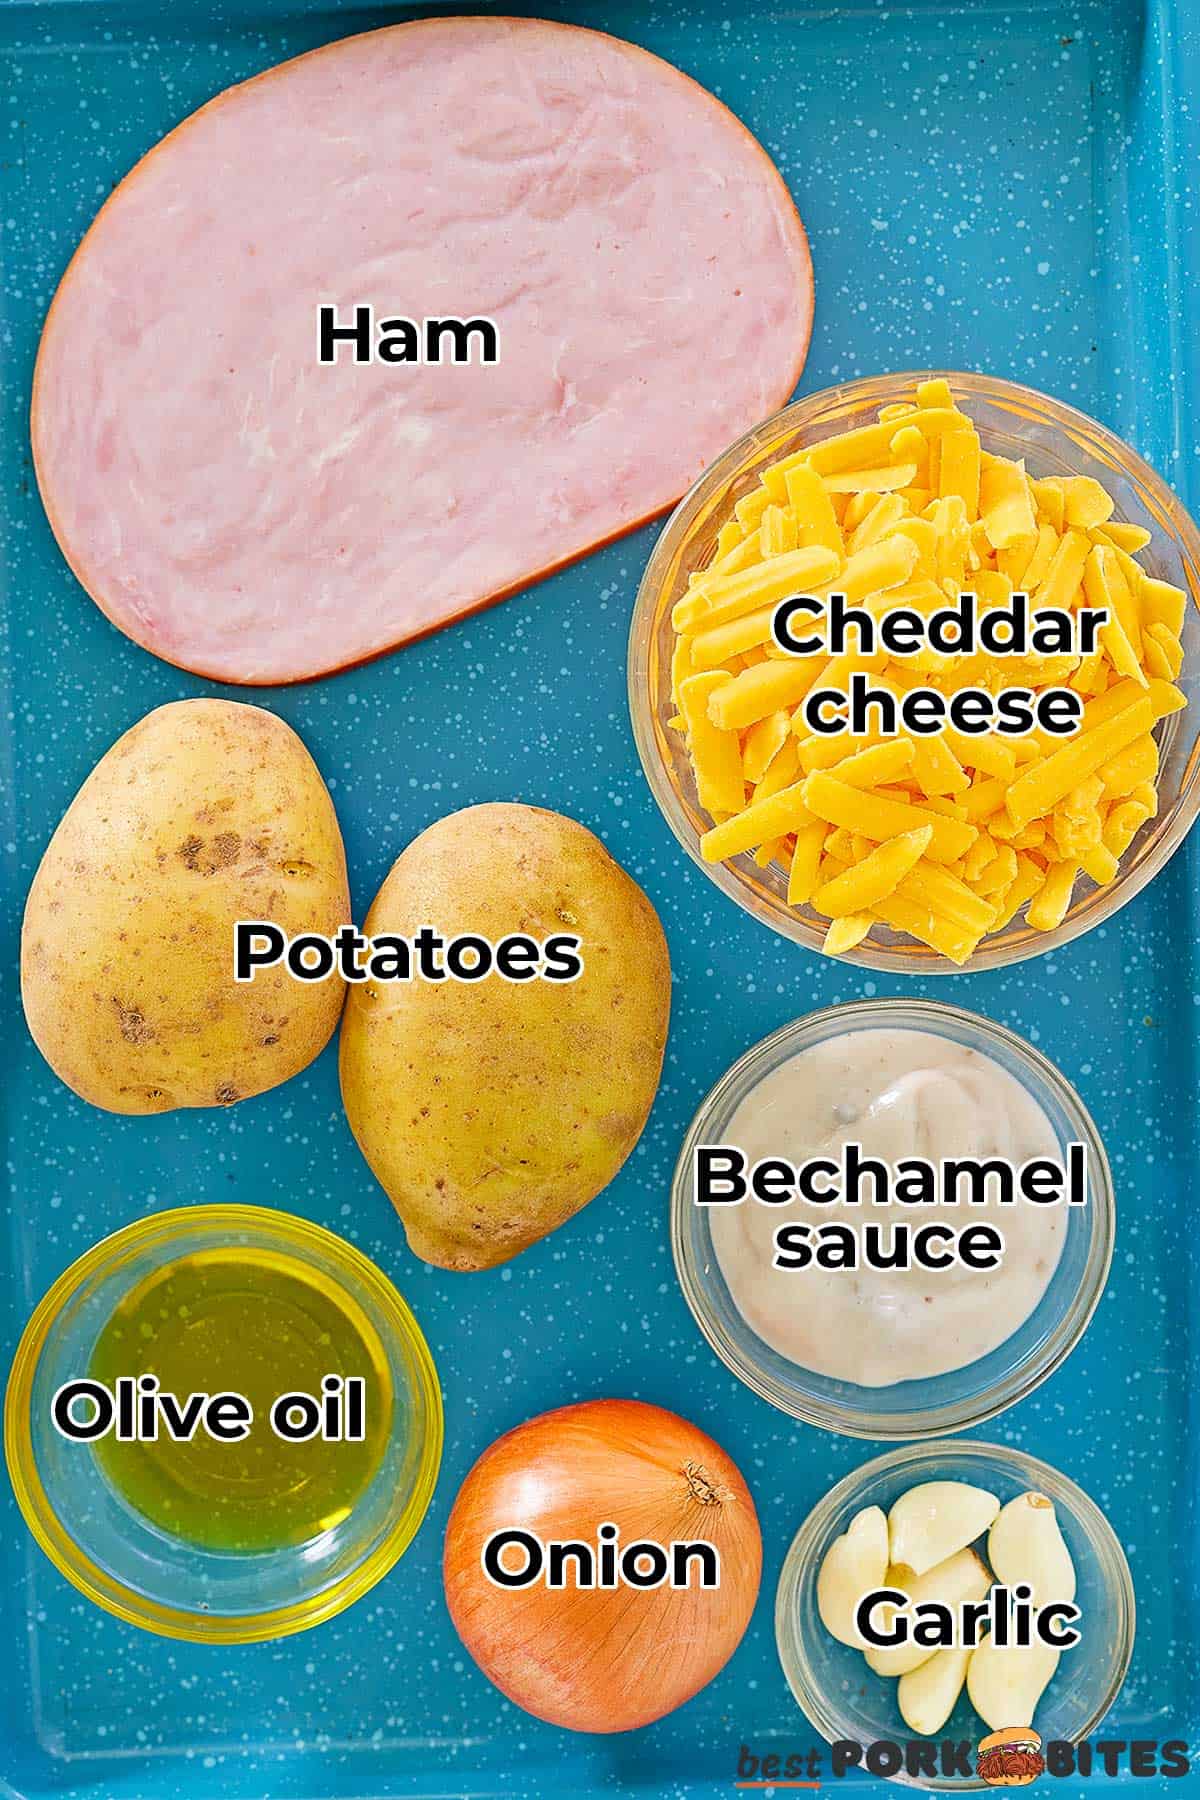 the ingredients for ham and cheese casserole laid out on a blue baking tray, with labels